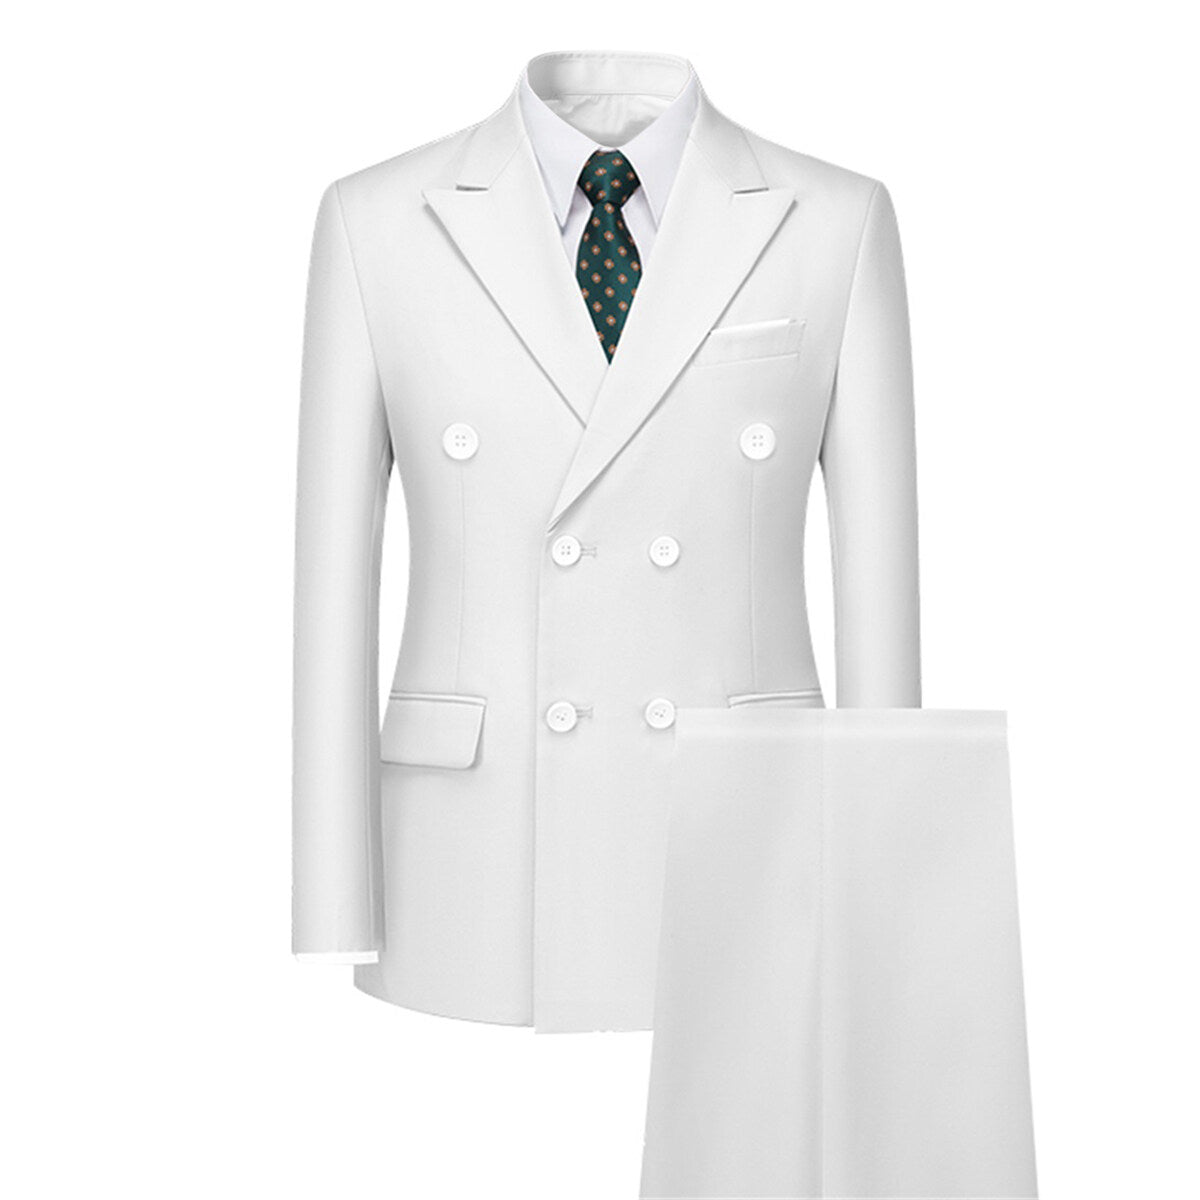 Men's Solid Color Double Breasted Business Suit White